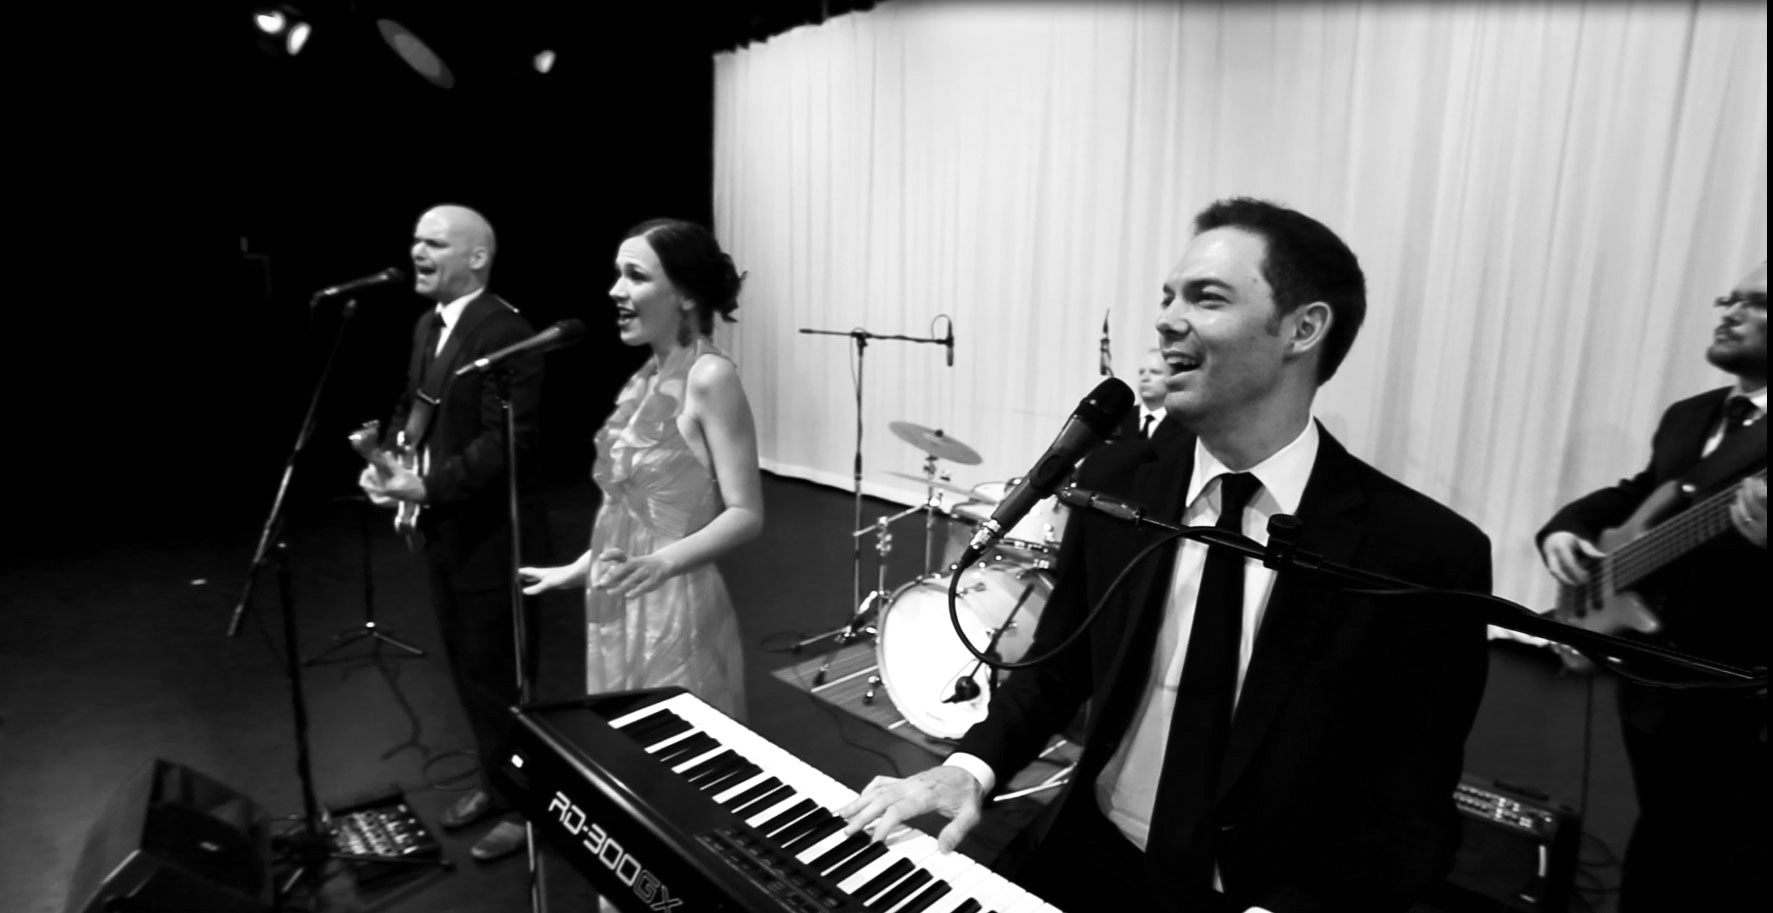 Park Avenue Band - Brisbane Corporate Entertainment and Wedding Band